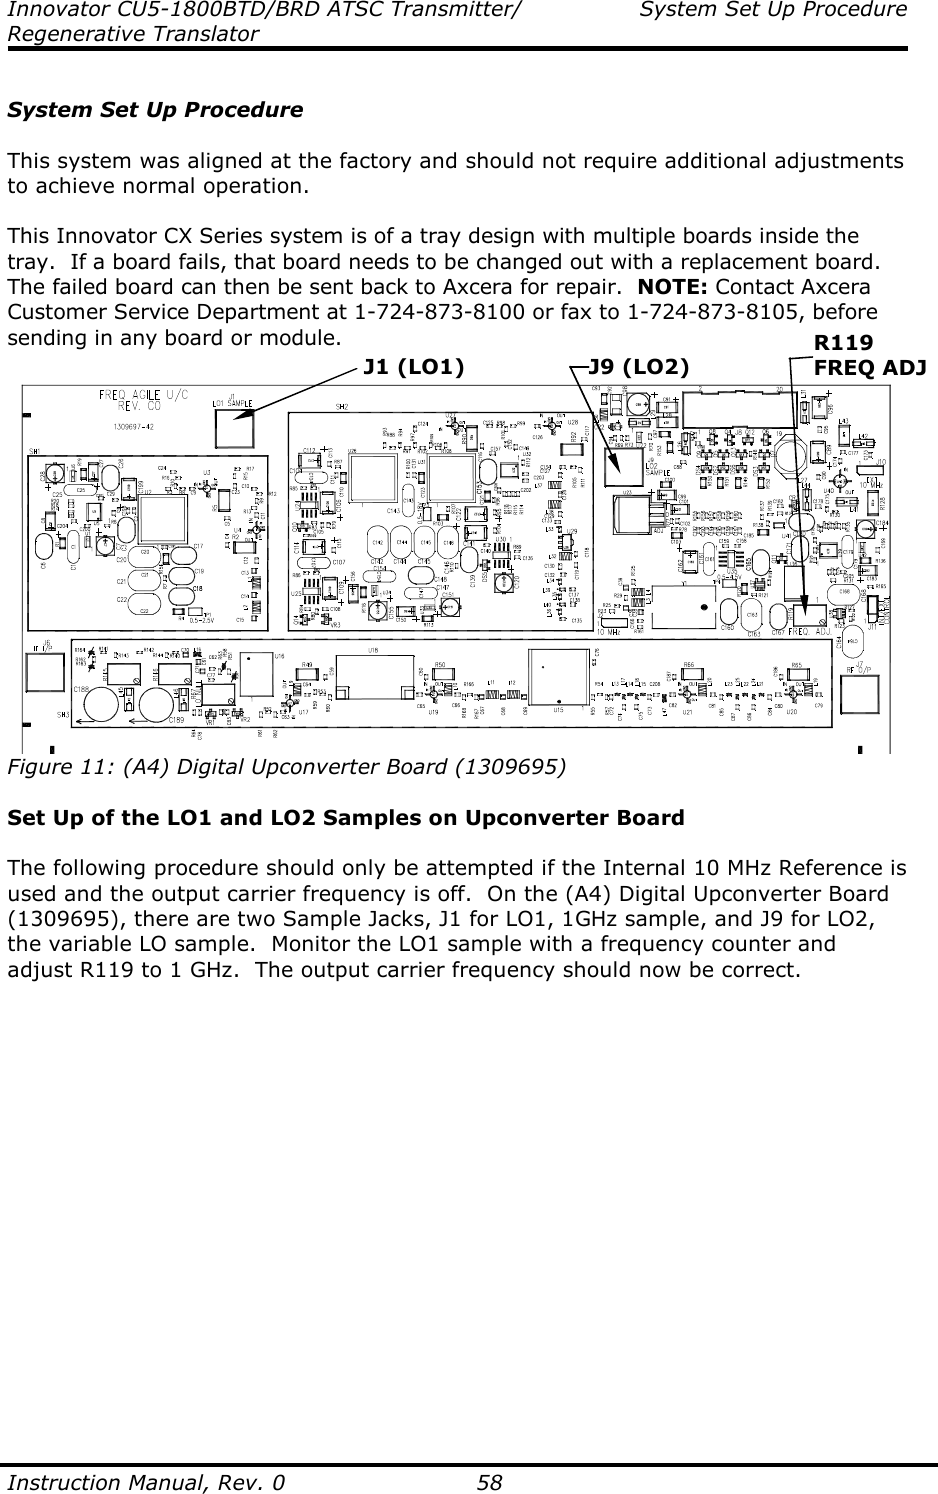 Innovator CU5-1800BTD/BRD ATSC Transmitter/  System Set Up Procedure Regenerative Translator  Instruction Manual, Rev. 0    58  System Set Up Procedure  This system was aligned at the factory and should not require additional adjustments to achieve normal operation.  This Innovator CX Series system is of a tray design with multiple boards inside the tray.  If a board fails, that board needs to be changed out with a replacement board.  The failed board can then be sent back to Axcera for repair.  NOTE: Contact Axcera Customer Service Department at 1-724-873-8100 or fax to 1-724-873-8105, before sending in any board or module.   Figure 11: (A4) Digital Upconverter Board (1309695)  Set Up of the LO1 and LO2 Samples on Upconverter Board  The following procedure should only be attempted if the Internal 10 MHz Reference is used and the output carrier frequency is off.  On the (A4) Digital Upconverter Board (1309695), there are two Sample Jacks, J1 for LO1, 1GHz sample, and J9 for LO2, the variable LO sample.  Monitor the LO1 sample with a frequency counter and adjust R119 to 1 GHz.  The output carrier frequency should now be correct.  J1 (LO1) J9 (LO2) R119 FREQ ADJ 